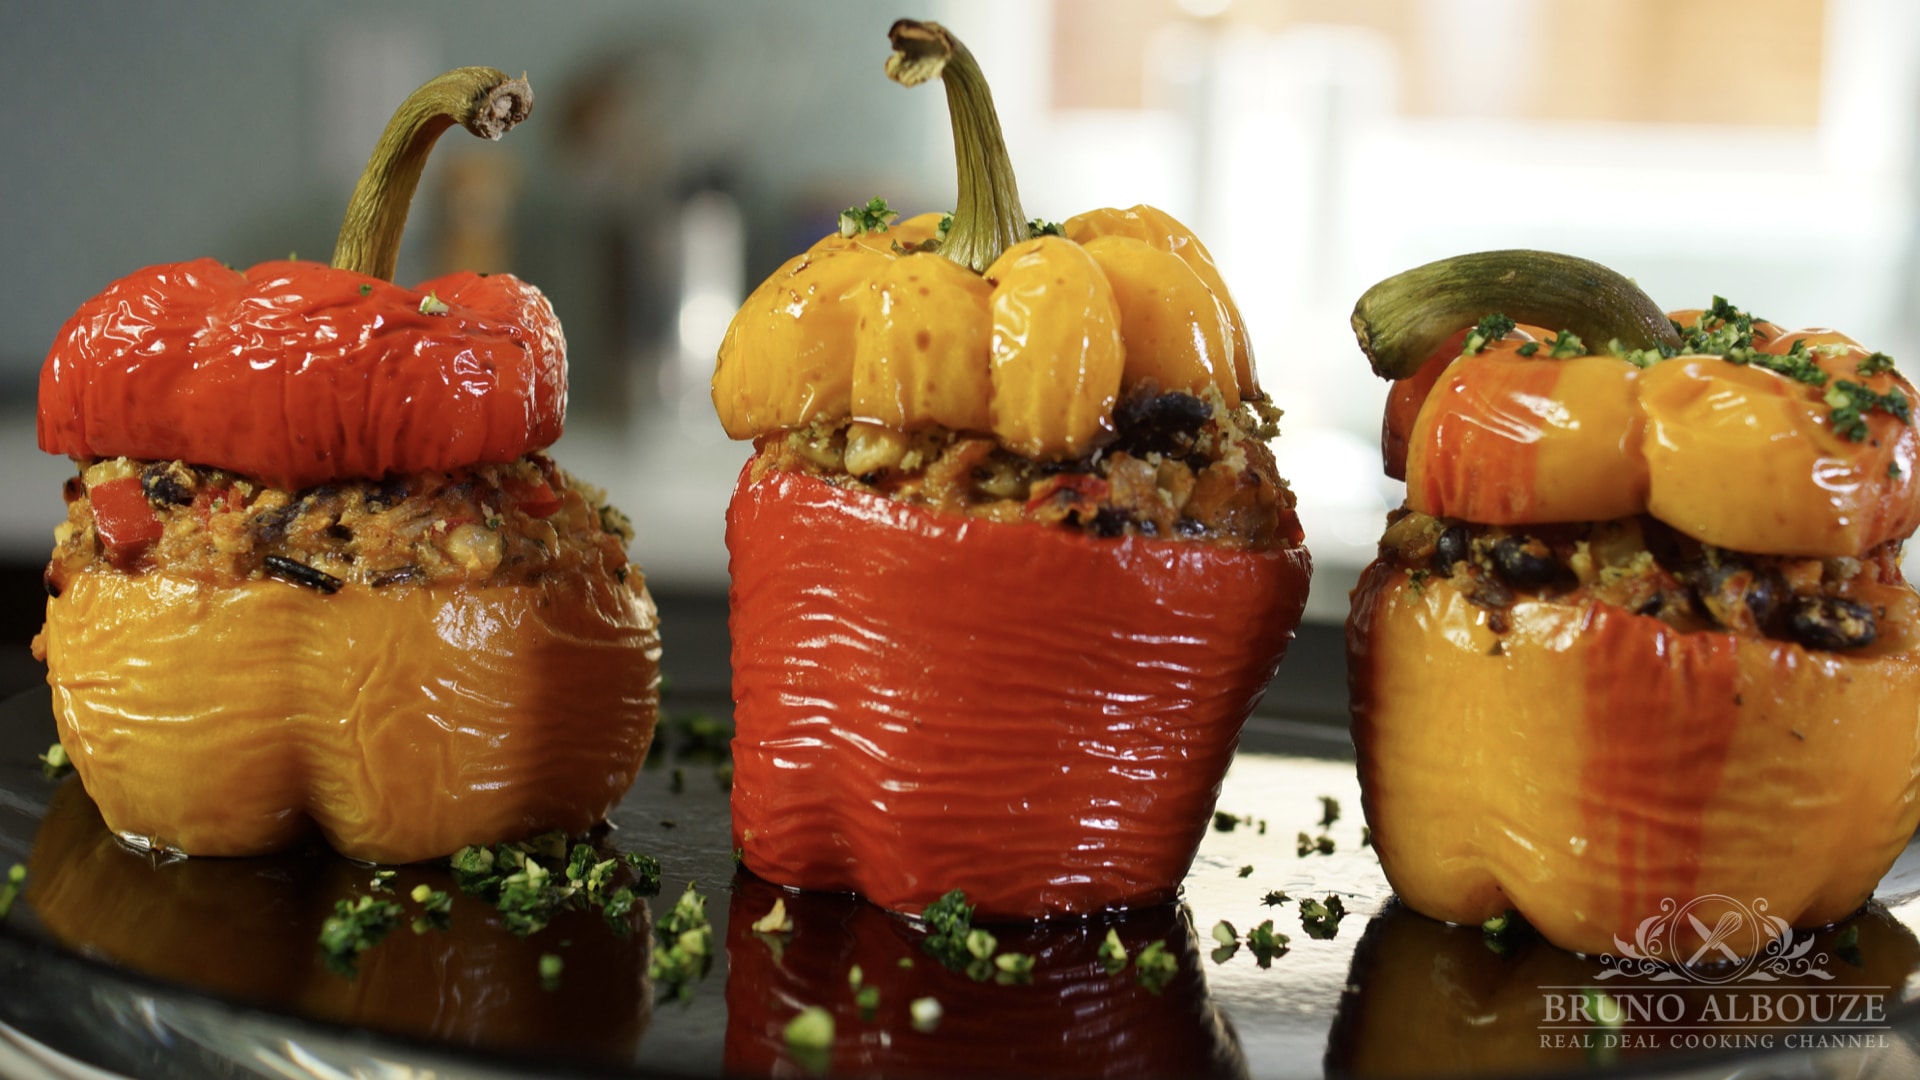 Bruno Albouze Stuffed Bell Peppers